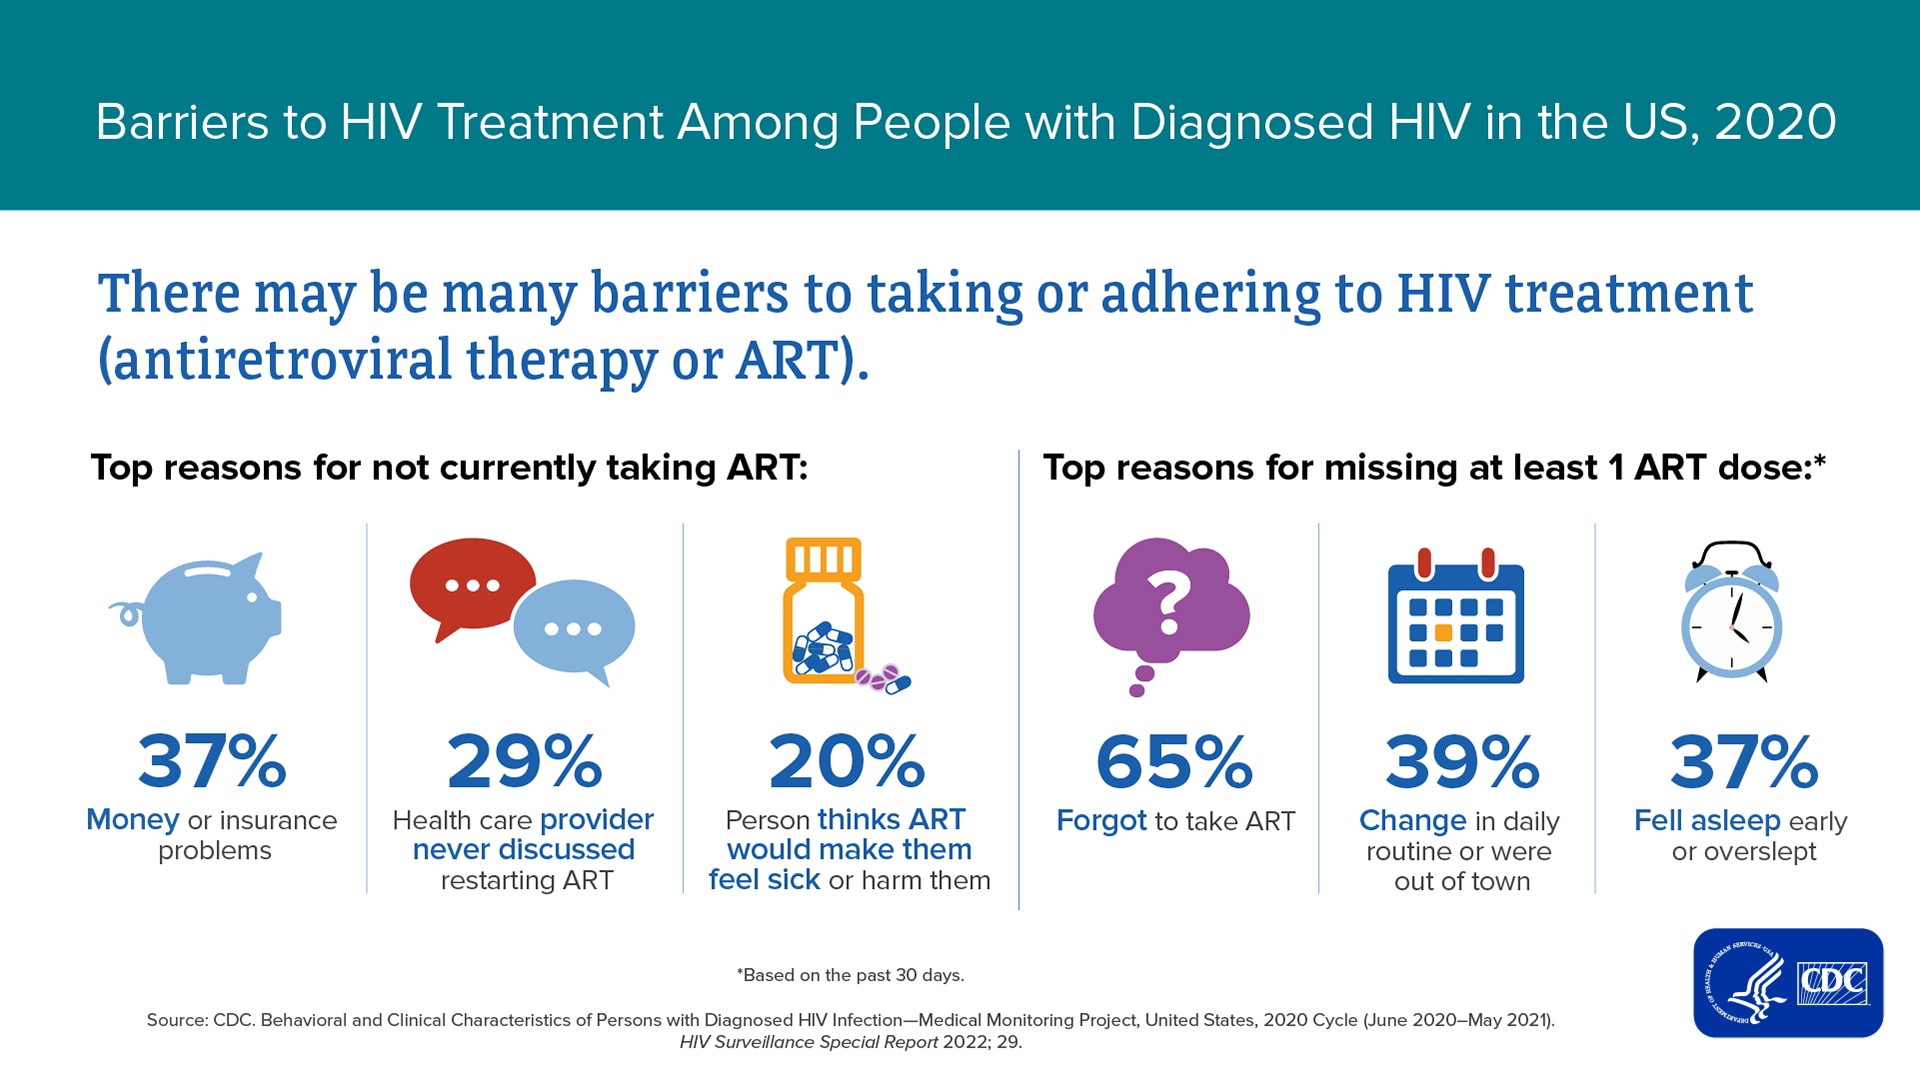 This image shows the top reasons for not taking ART and for missing at least 1 ART dose among people with diagnosed HIV.